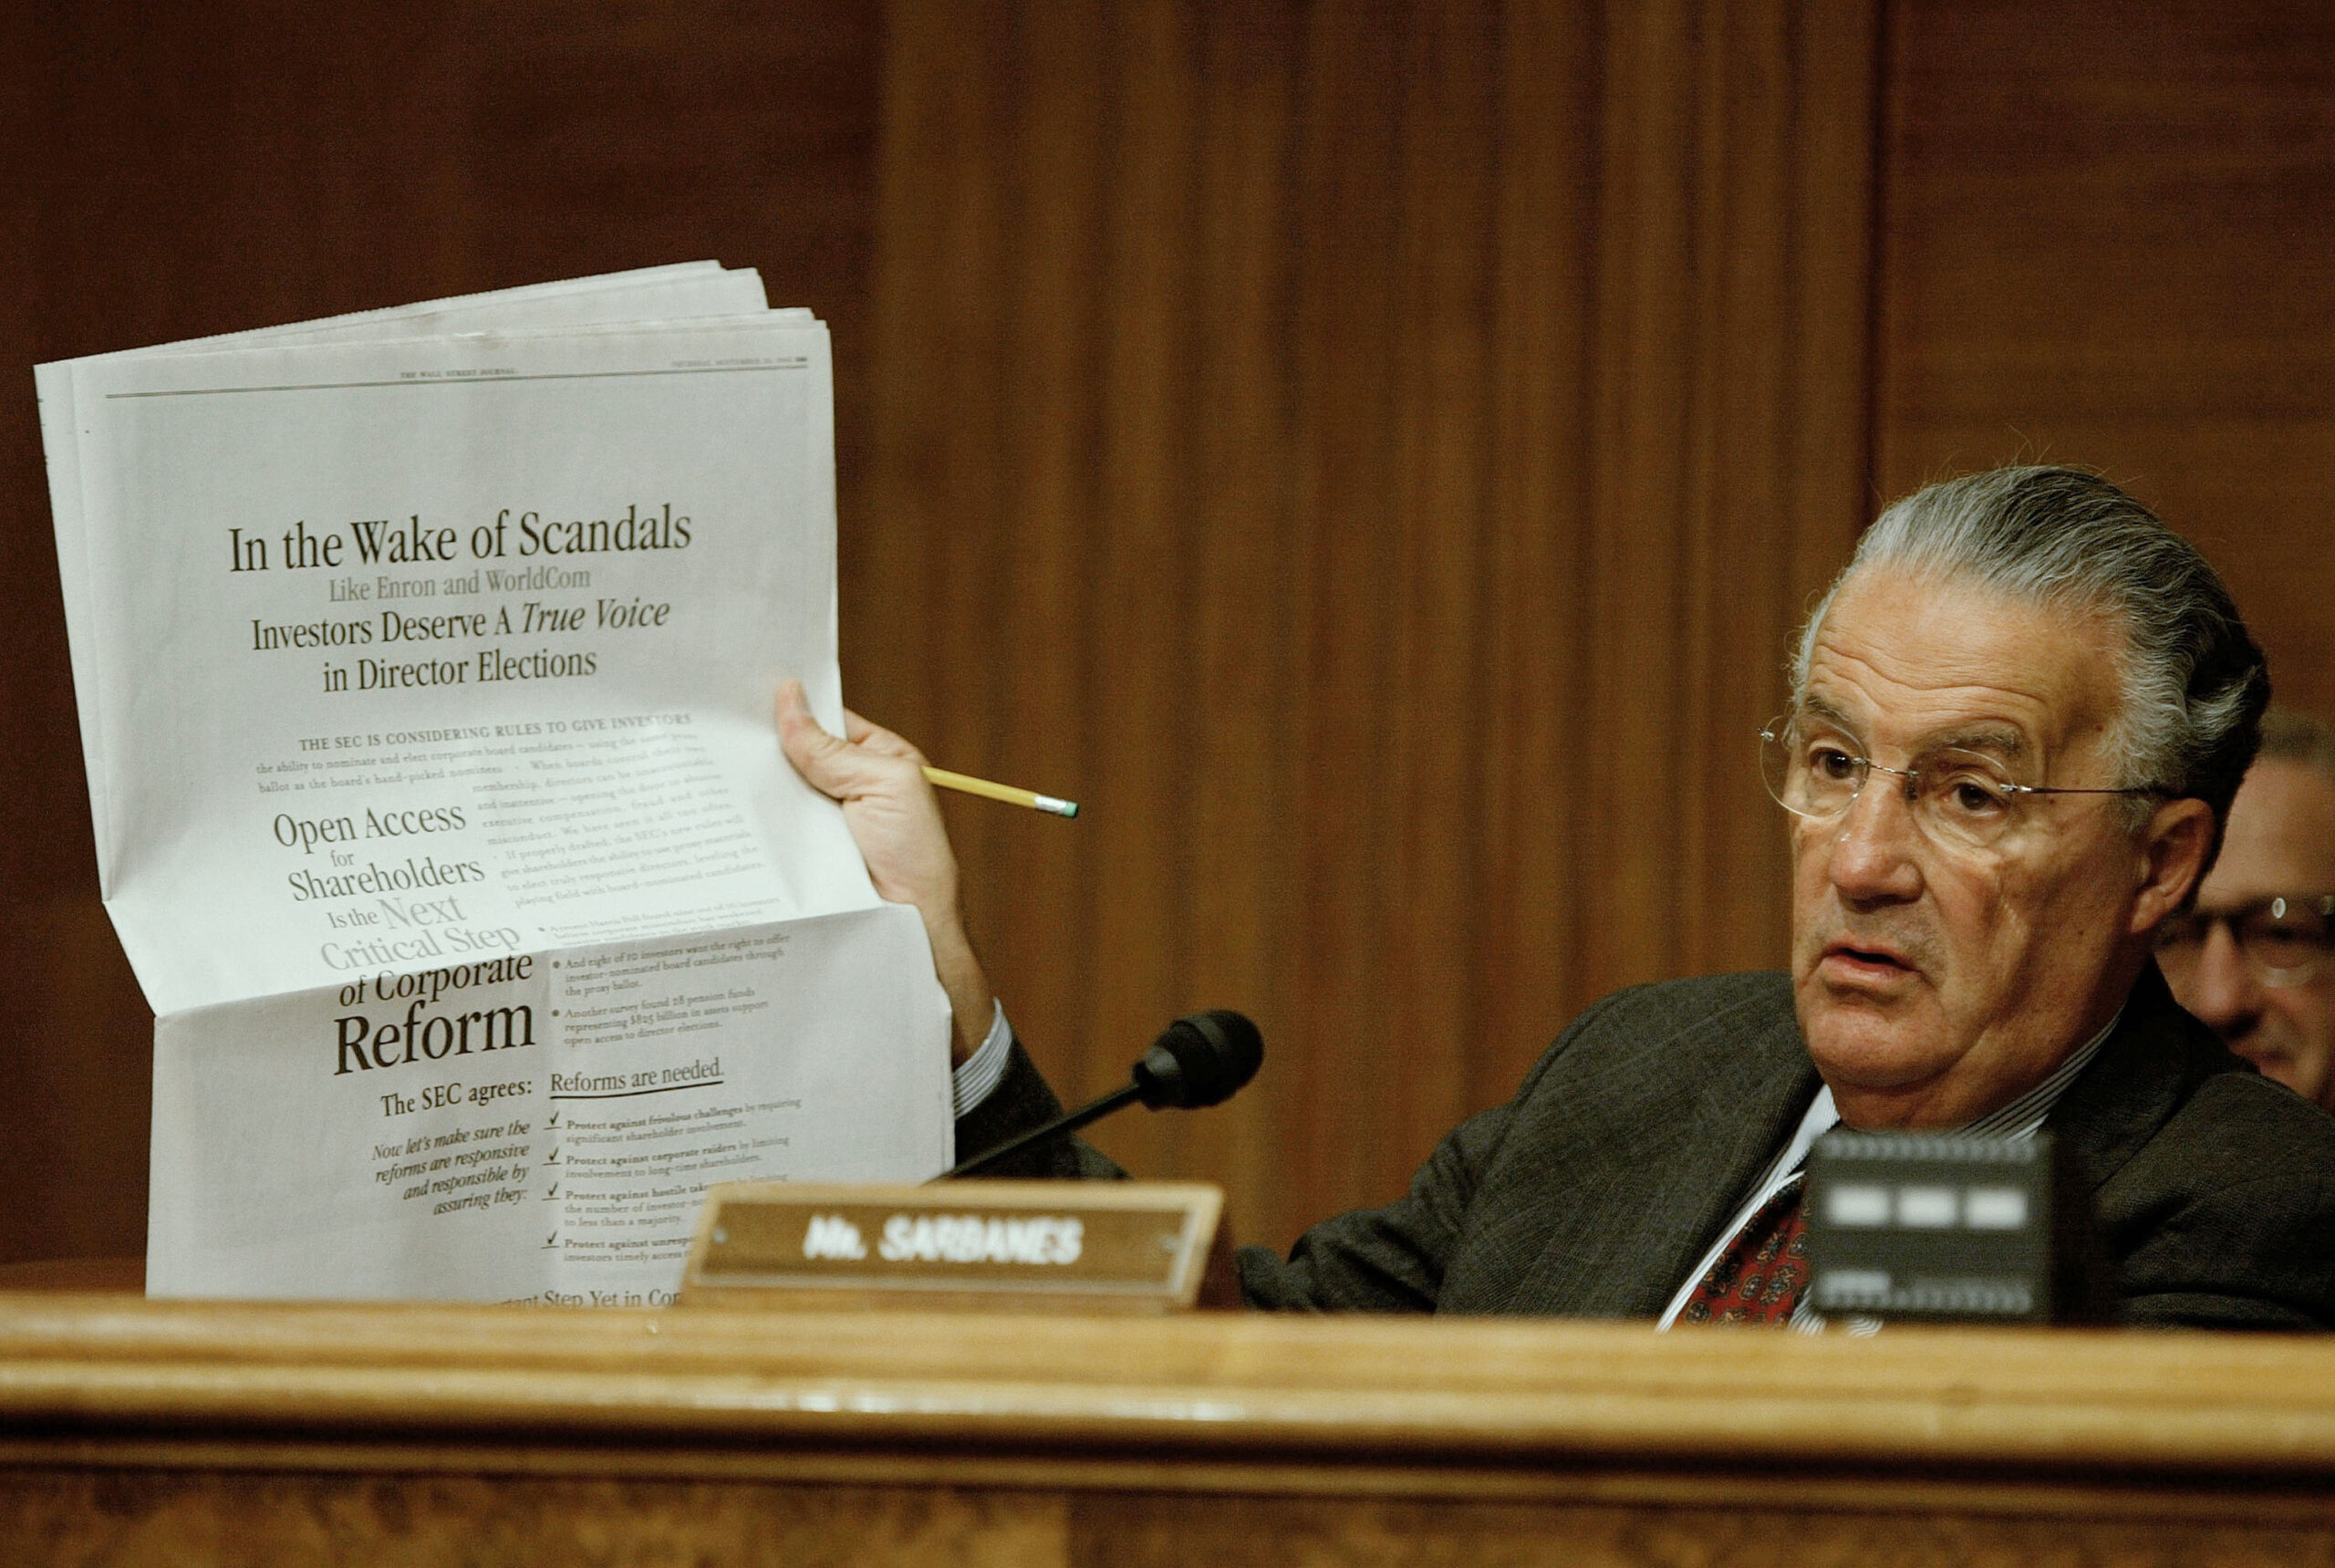 Paul Sarbanes holds up newspaper during Capitol Hill hearing